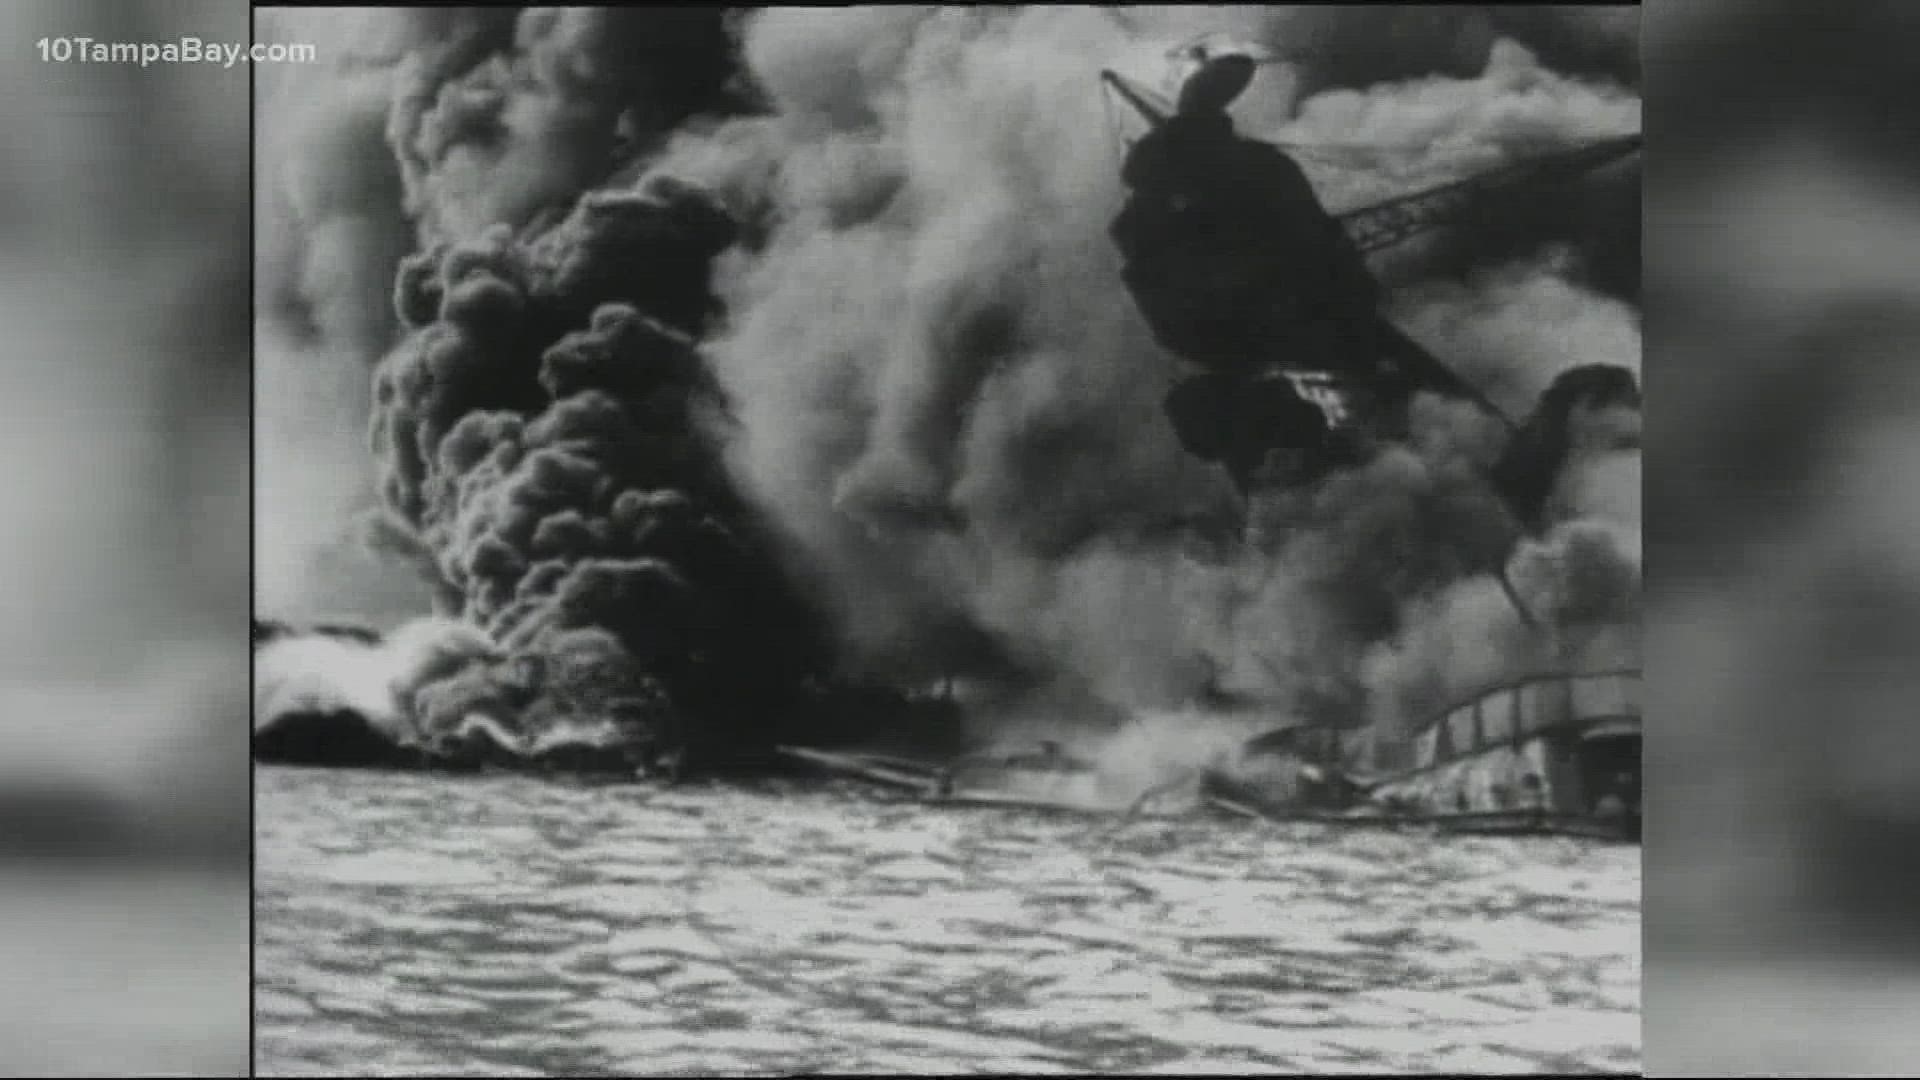 The December 7, 1941 Japanese raid on Pearl Harbor was one of the defining moments in history.